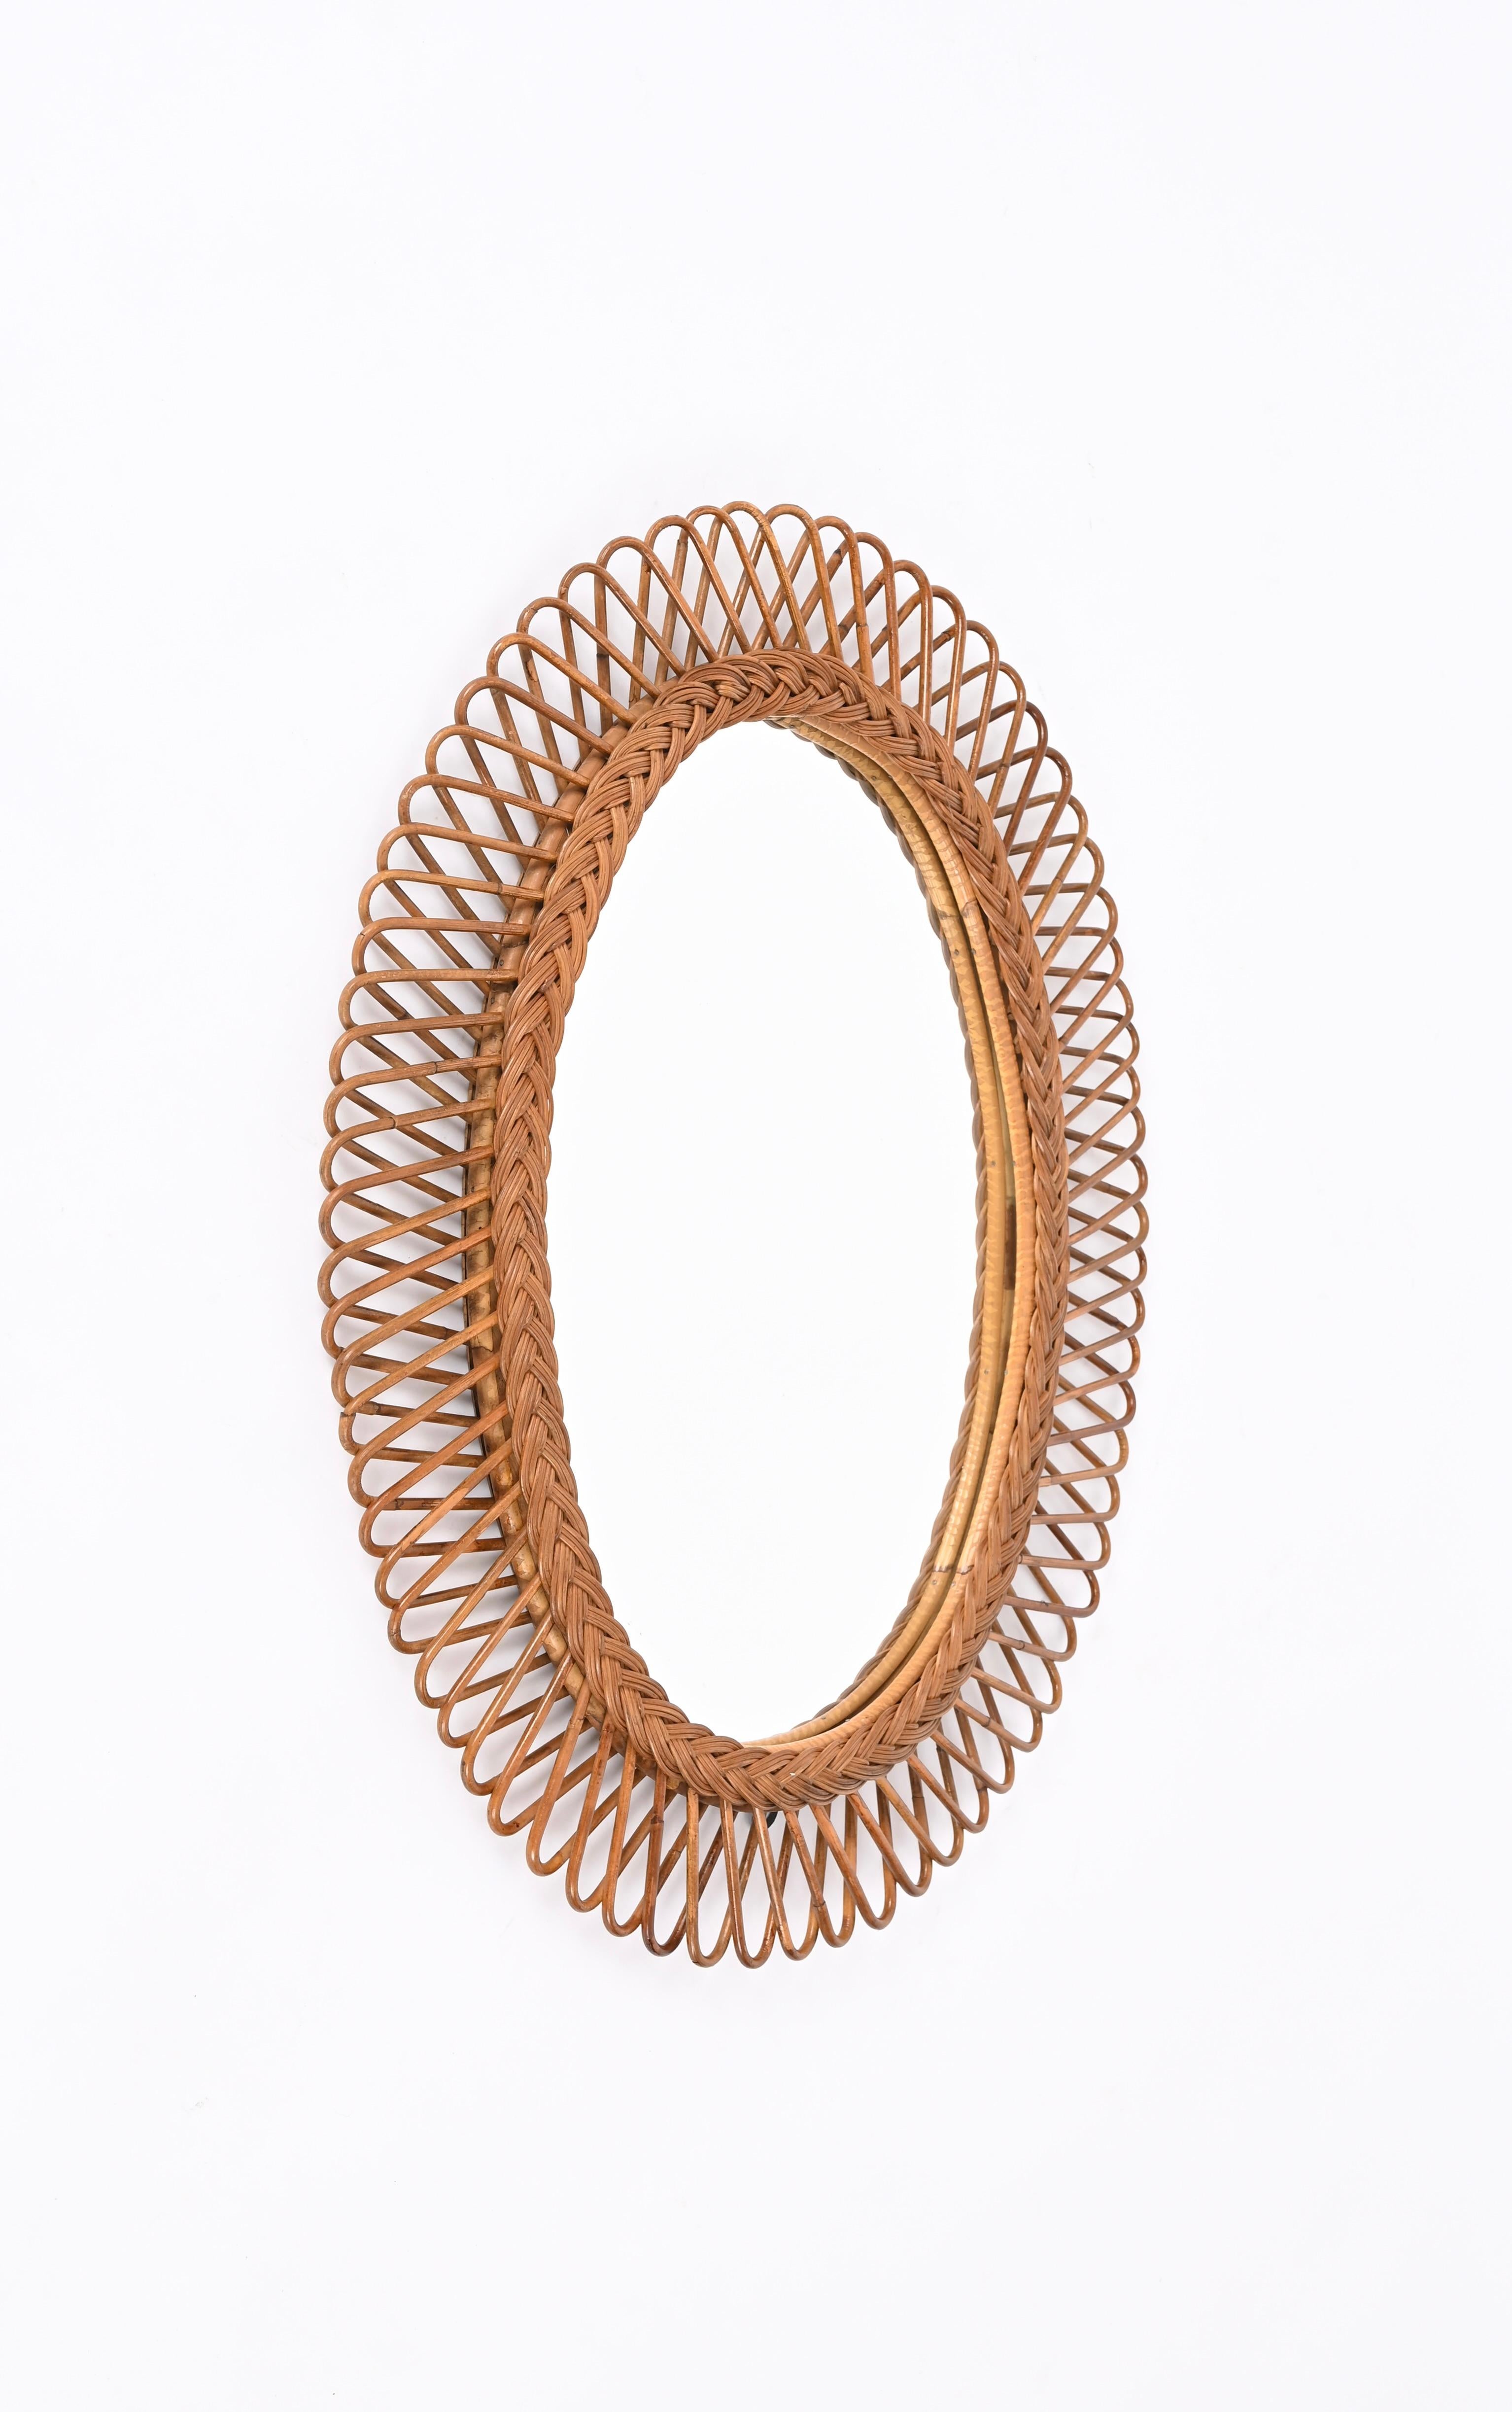 Franco Albini Midcentury  Bamboo, Rattan and Wicker Oval Mirror,  Italy 1970s For Sale 7